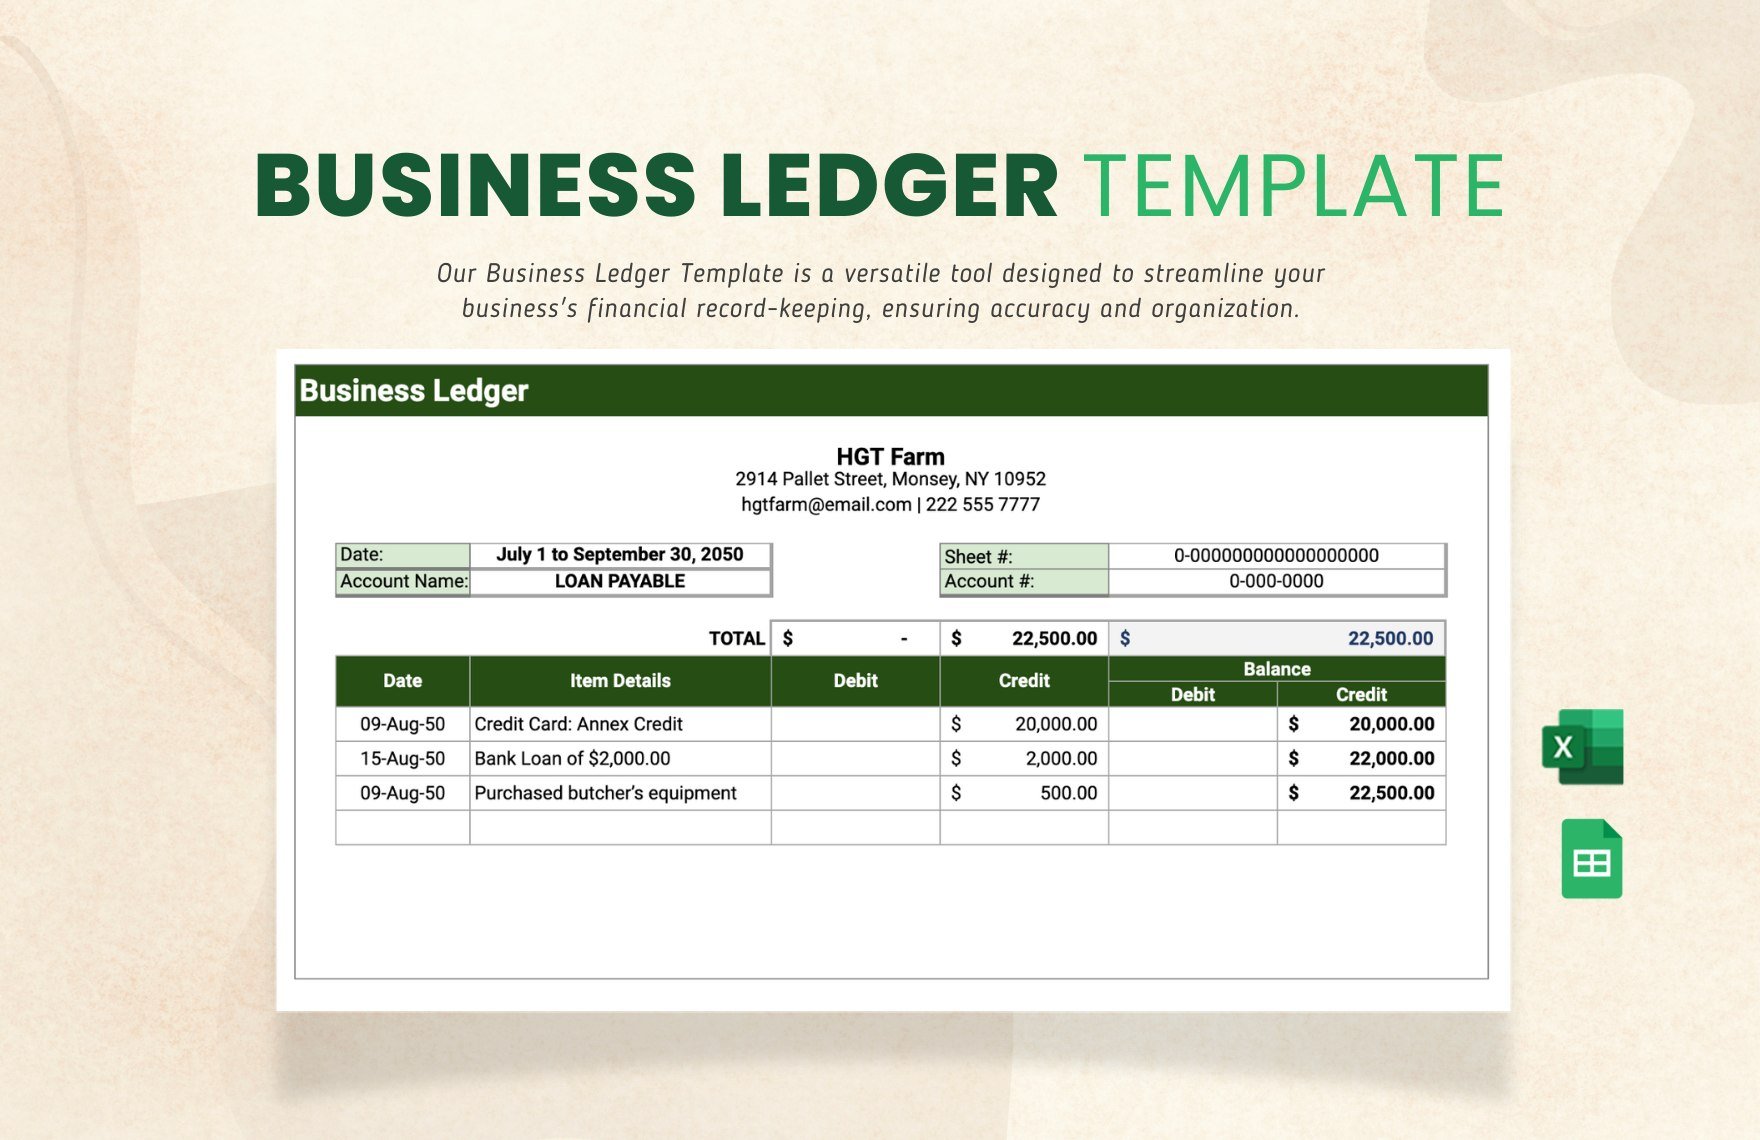 Business Ledger Template in Excel, Google Sheets